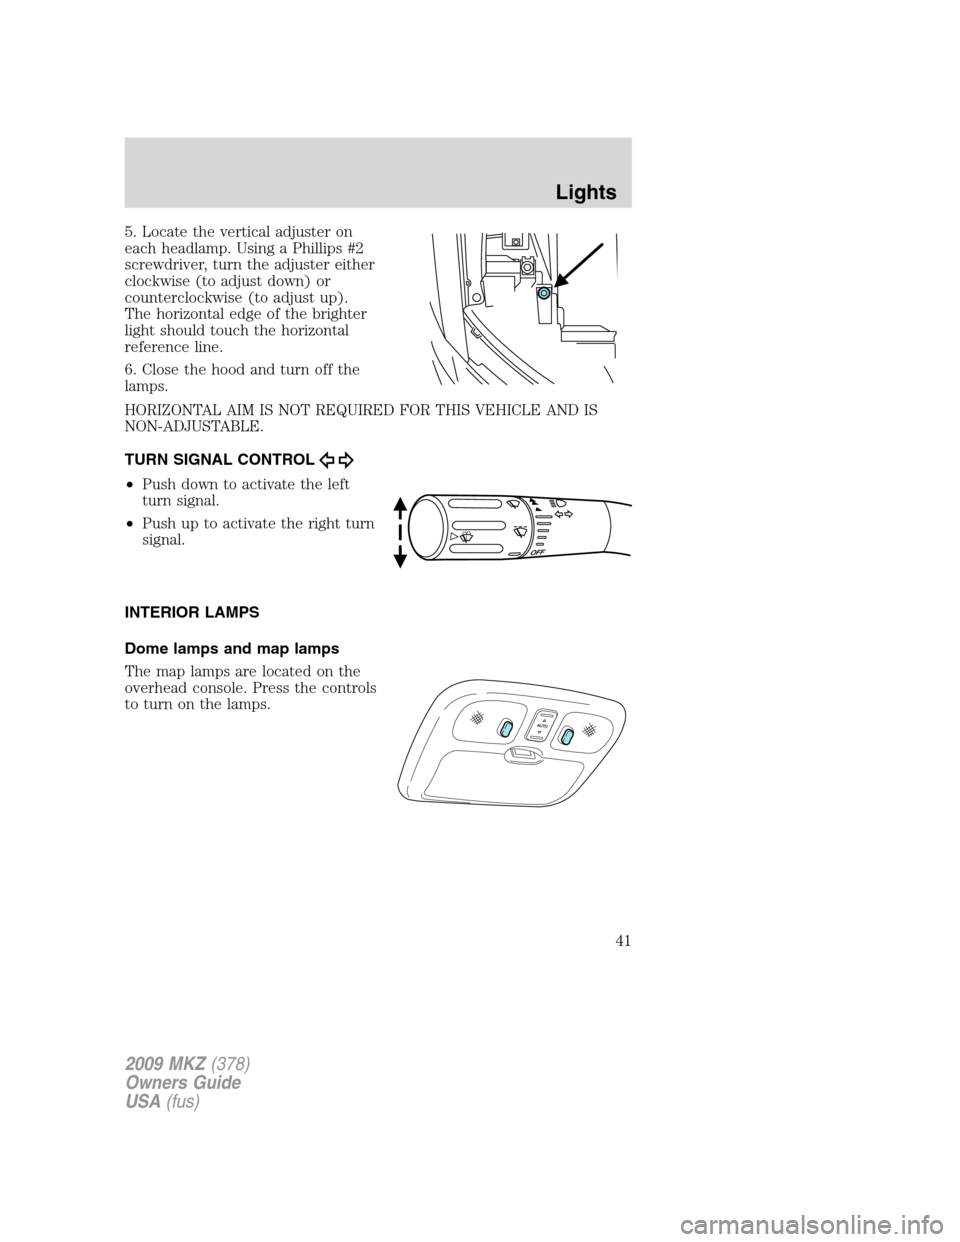 LINCOLN MKZ 2009  Owners Manual 5. Locate the vertical adjuster on
each headlamp. Using a Phillips #2
screwdriver, turn the adjuster either
clockwise (to adjust down) or
counterclockwise (to adjust up).
The horizontal edge of the br